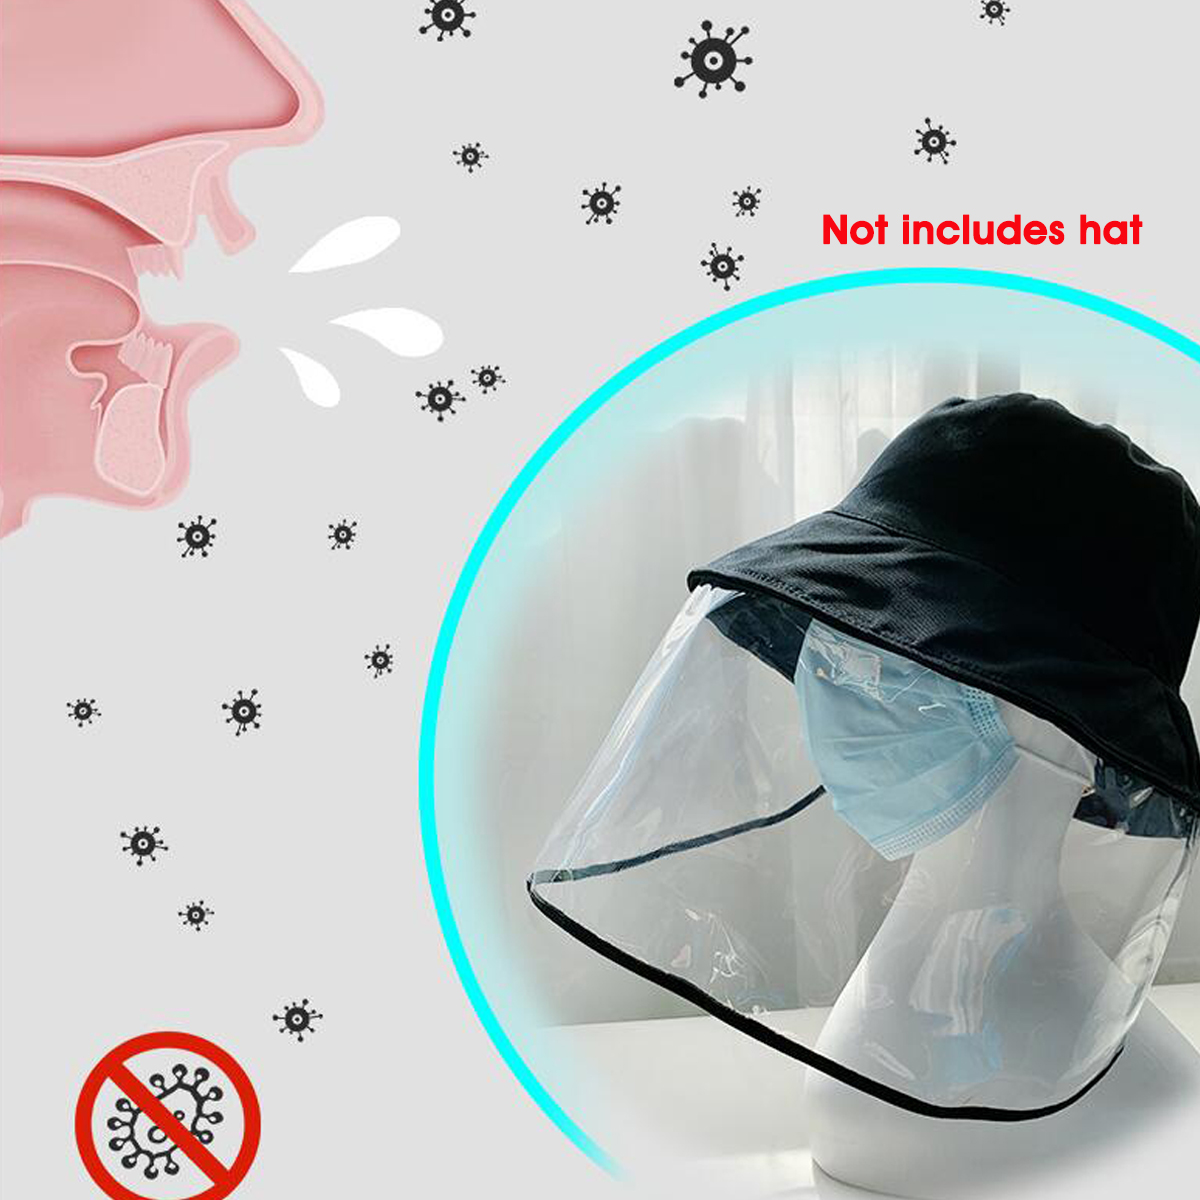 PVC-Transparent-Breathable-Splash-proof-Dustproof-Full-Face-Mask-Disassembleable-For-All-Hats-Fishma-1660688-1